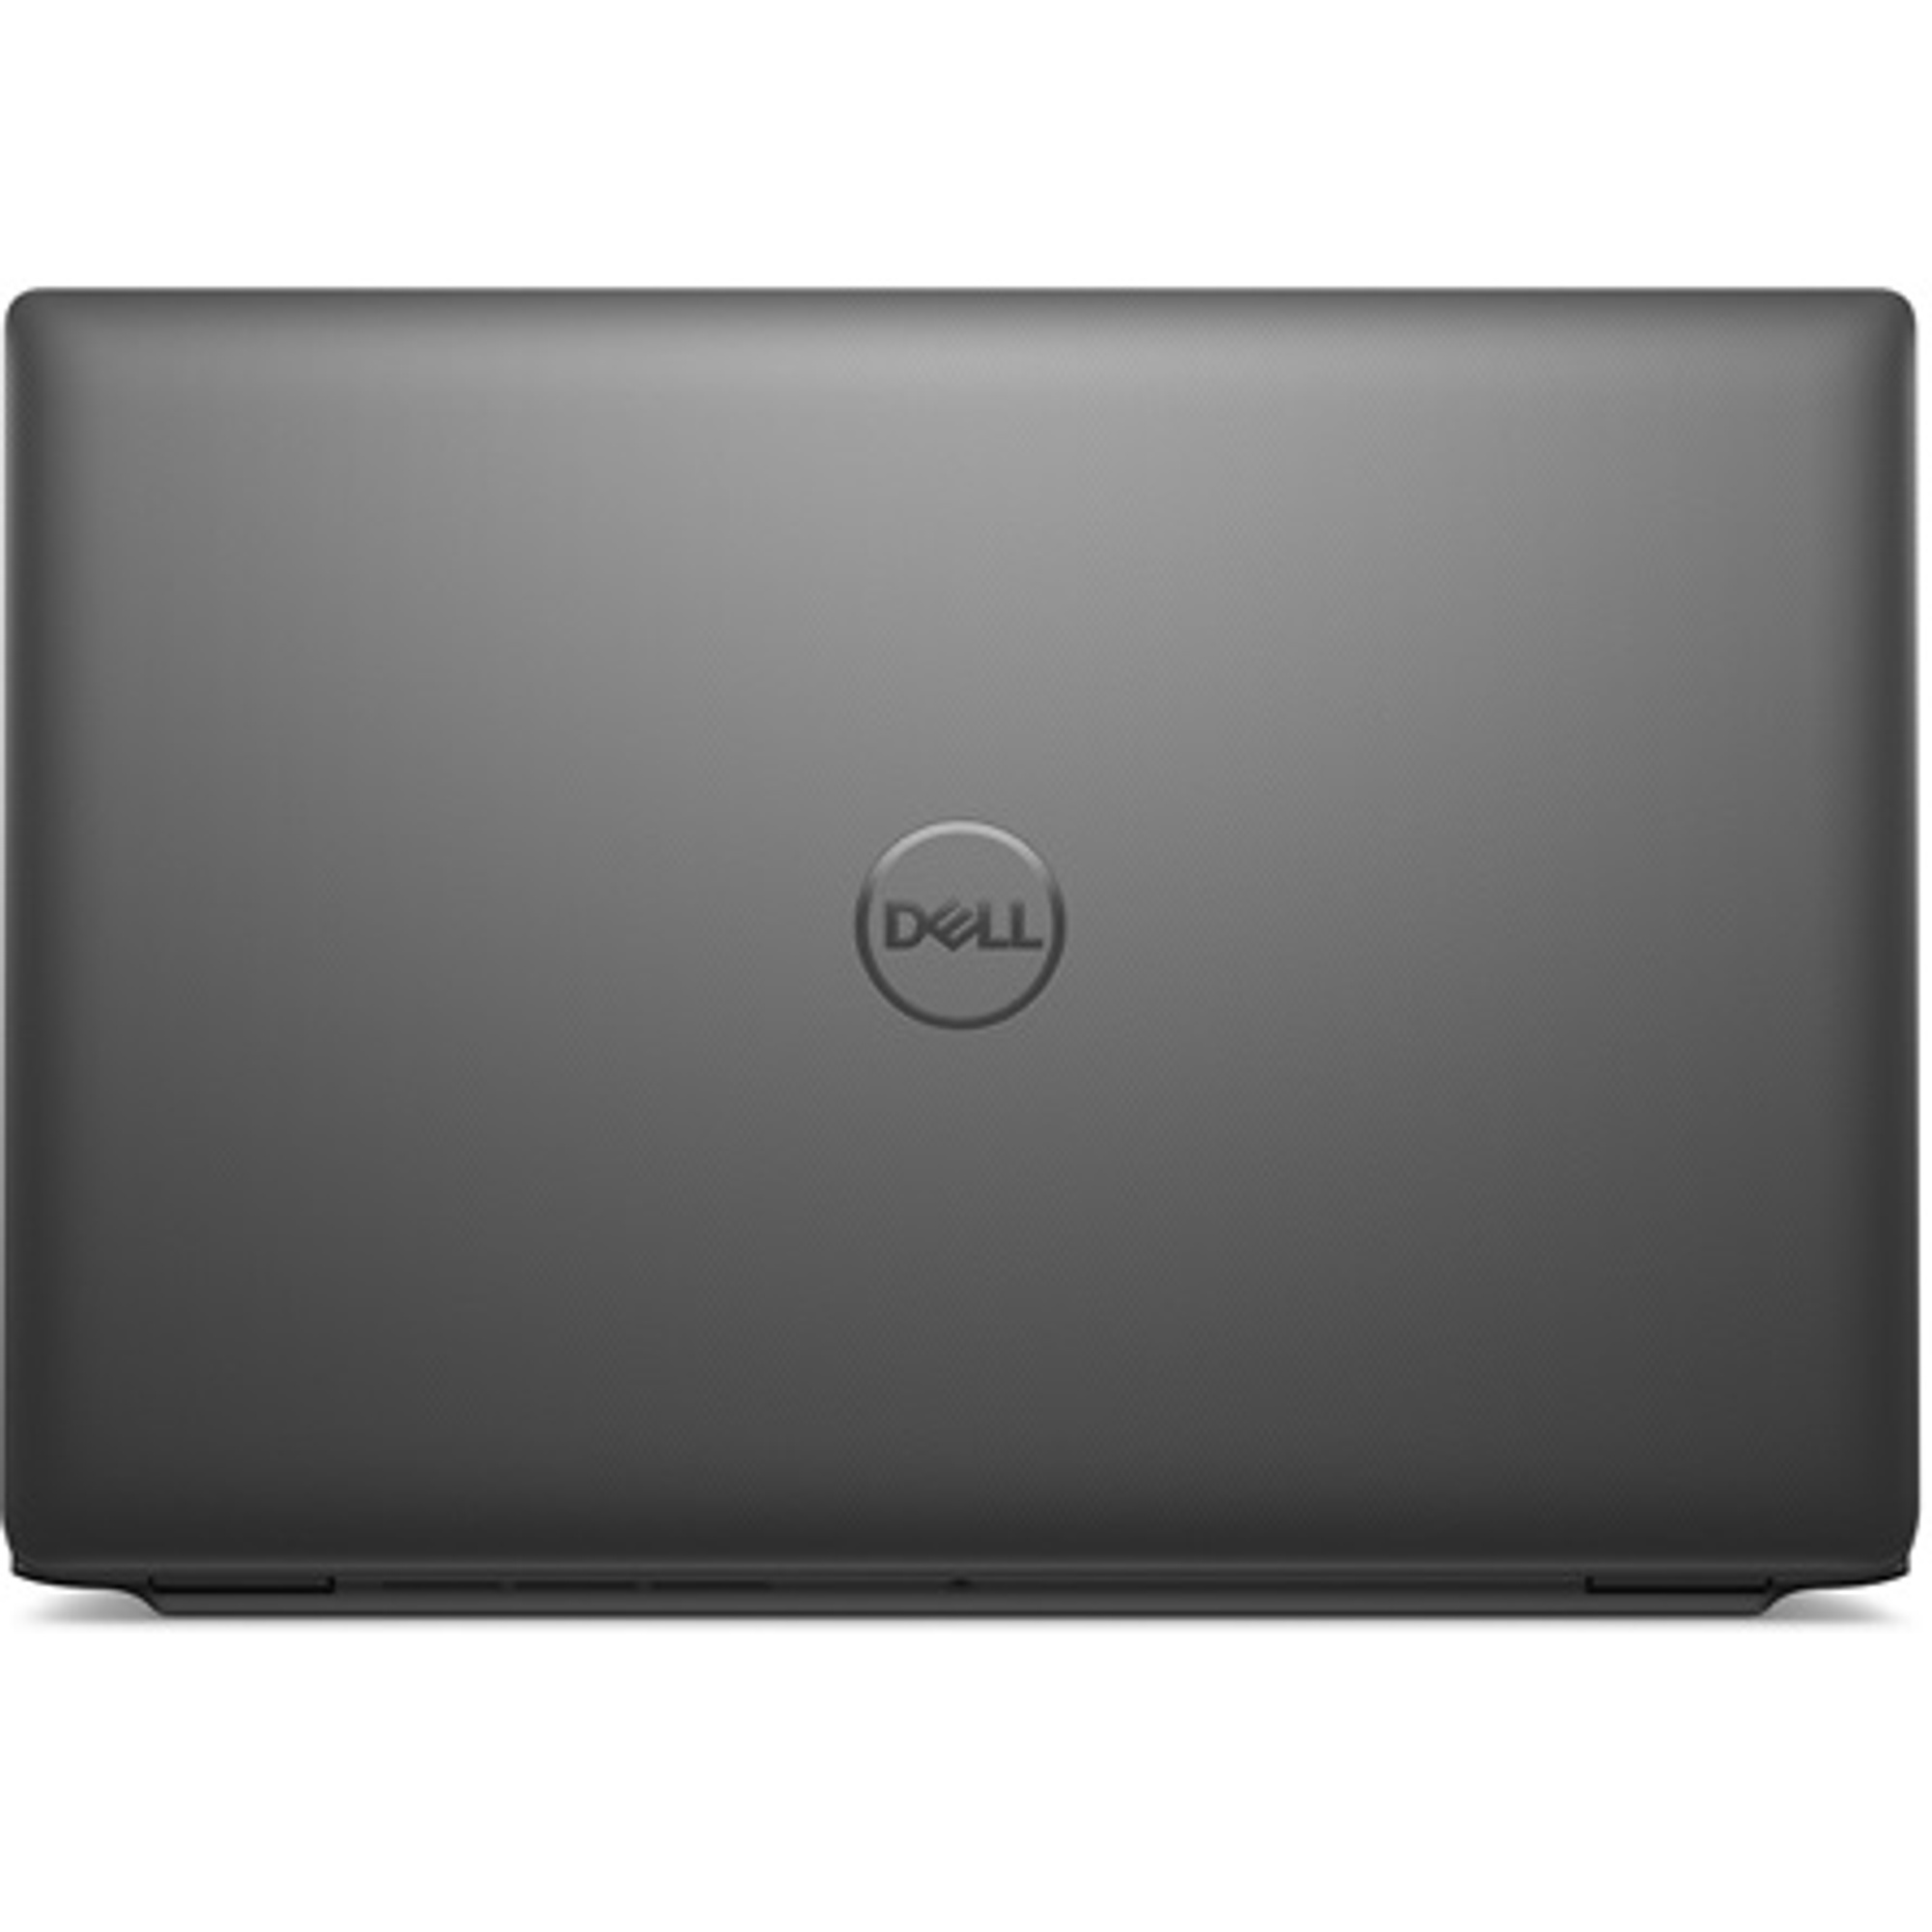 DELL L3440-6 Laptop / Notebook 7